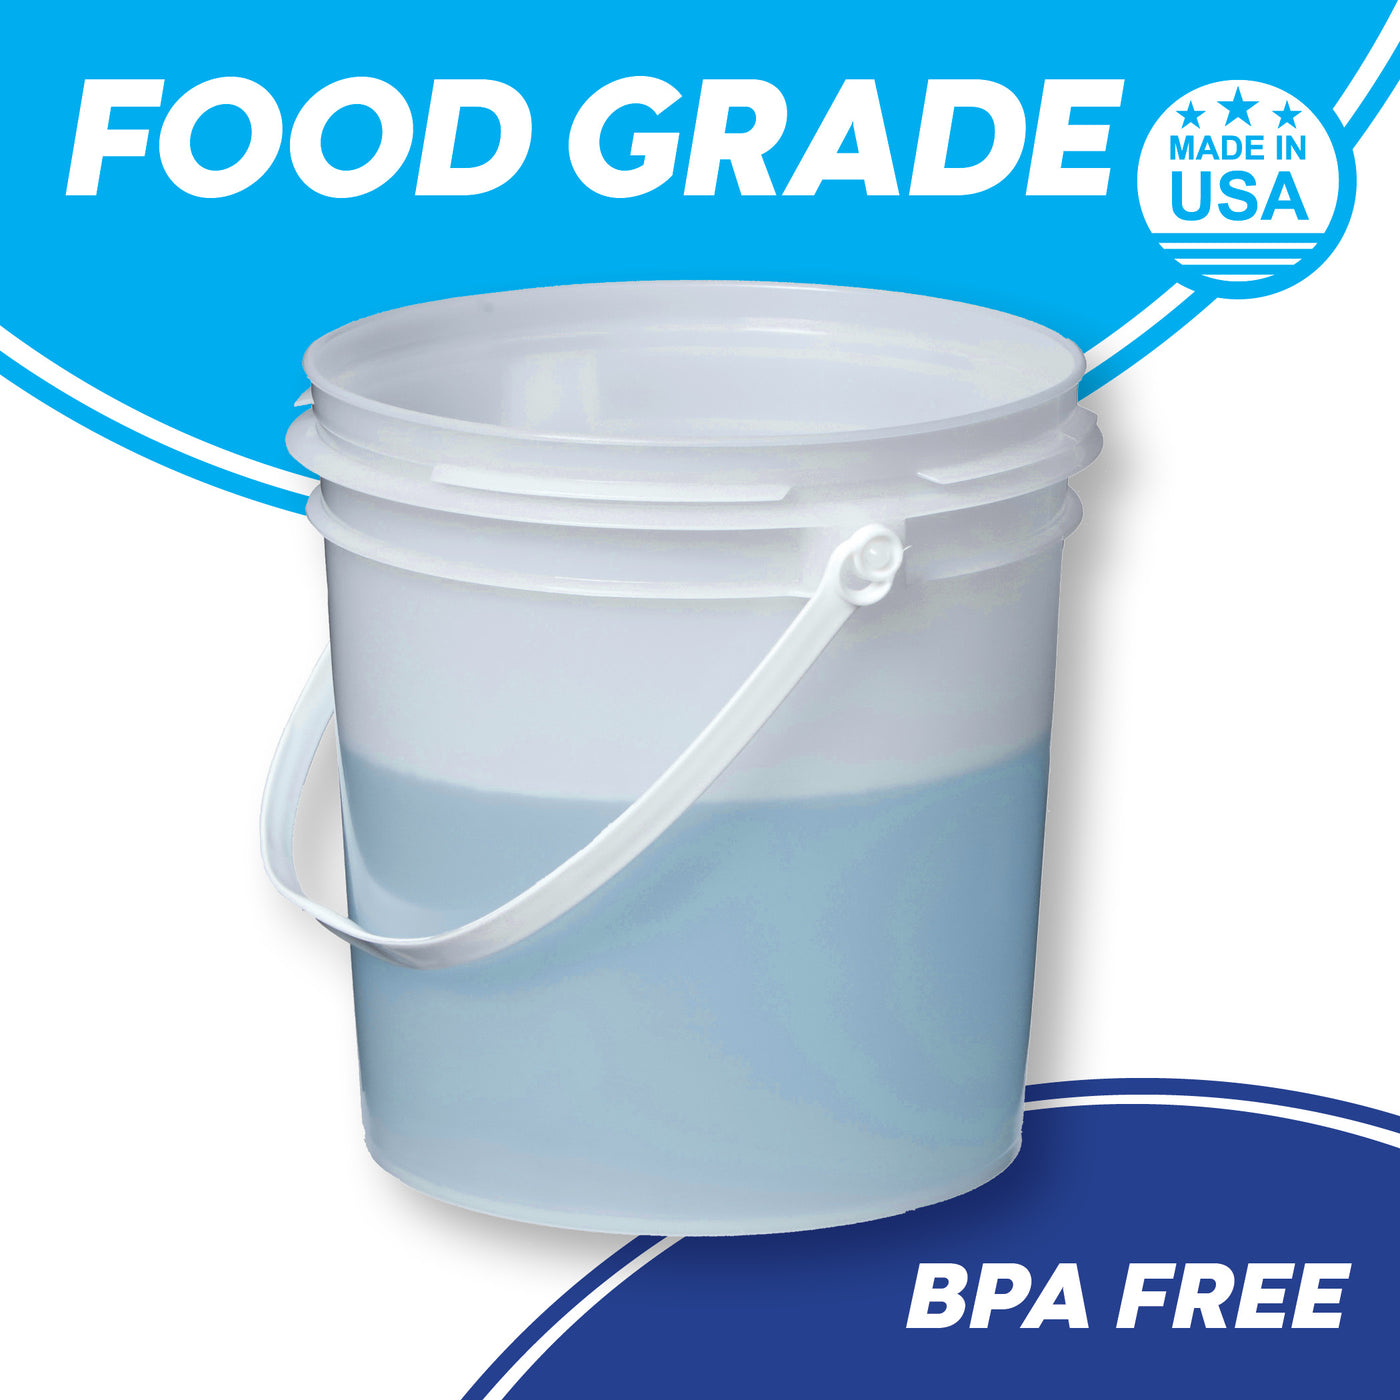 1 Gallon Food Grade Buckets with Lids BPA Free Plastic containers